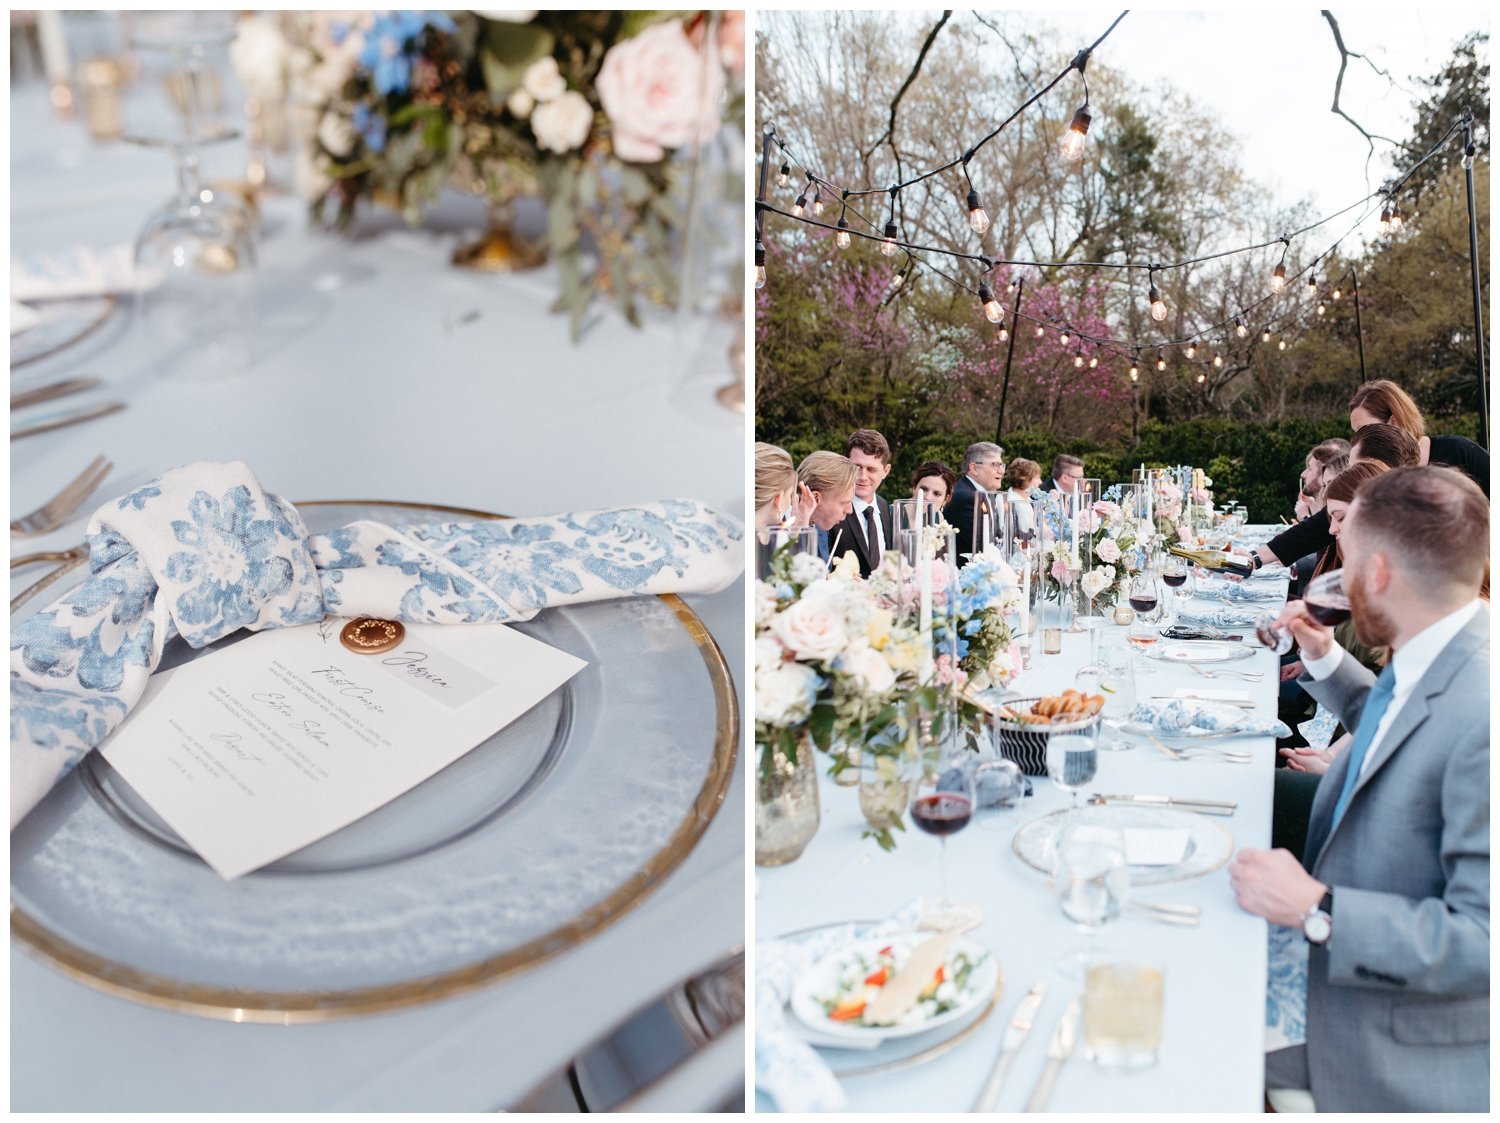 Guests enjoy a small wedding reception with blue  linens